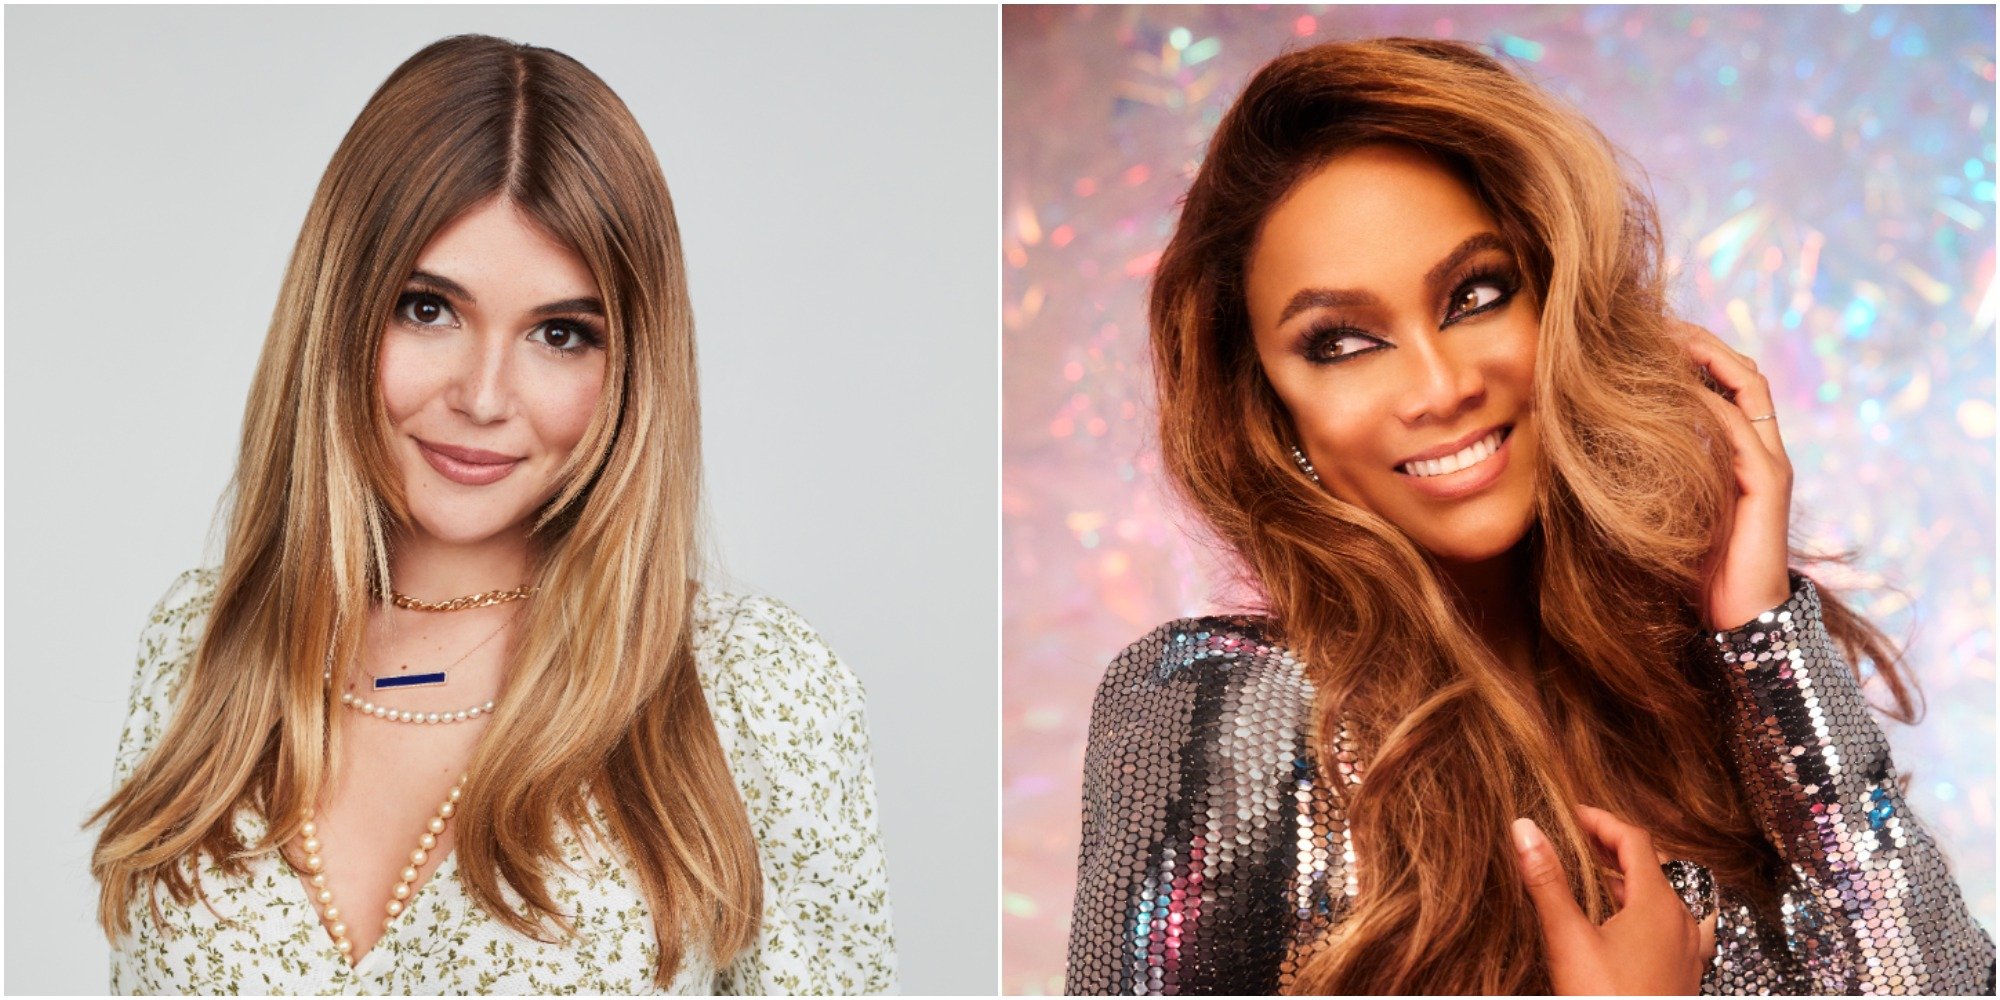 Olivia Jade and Tyra Banks pose for "DWTS" promotional photographs.